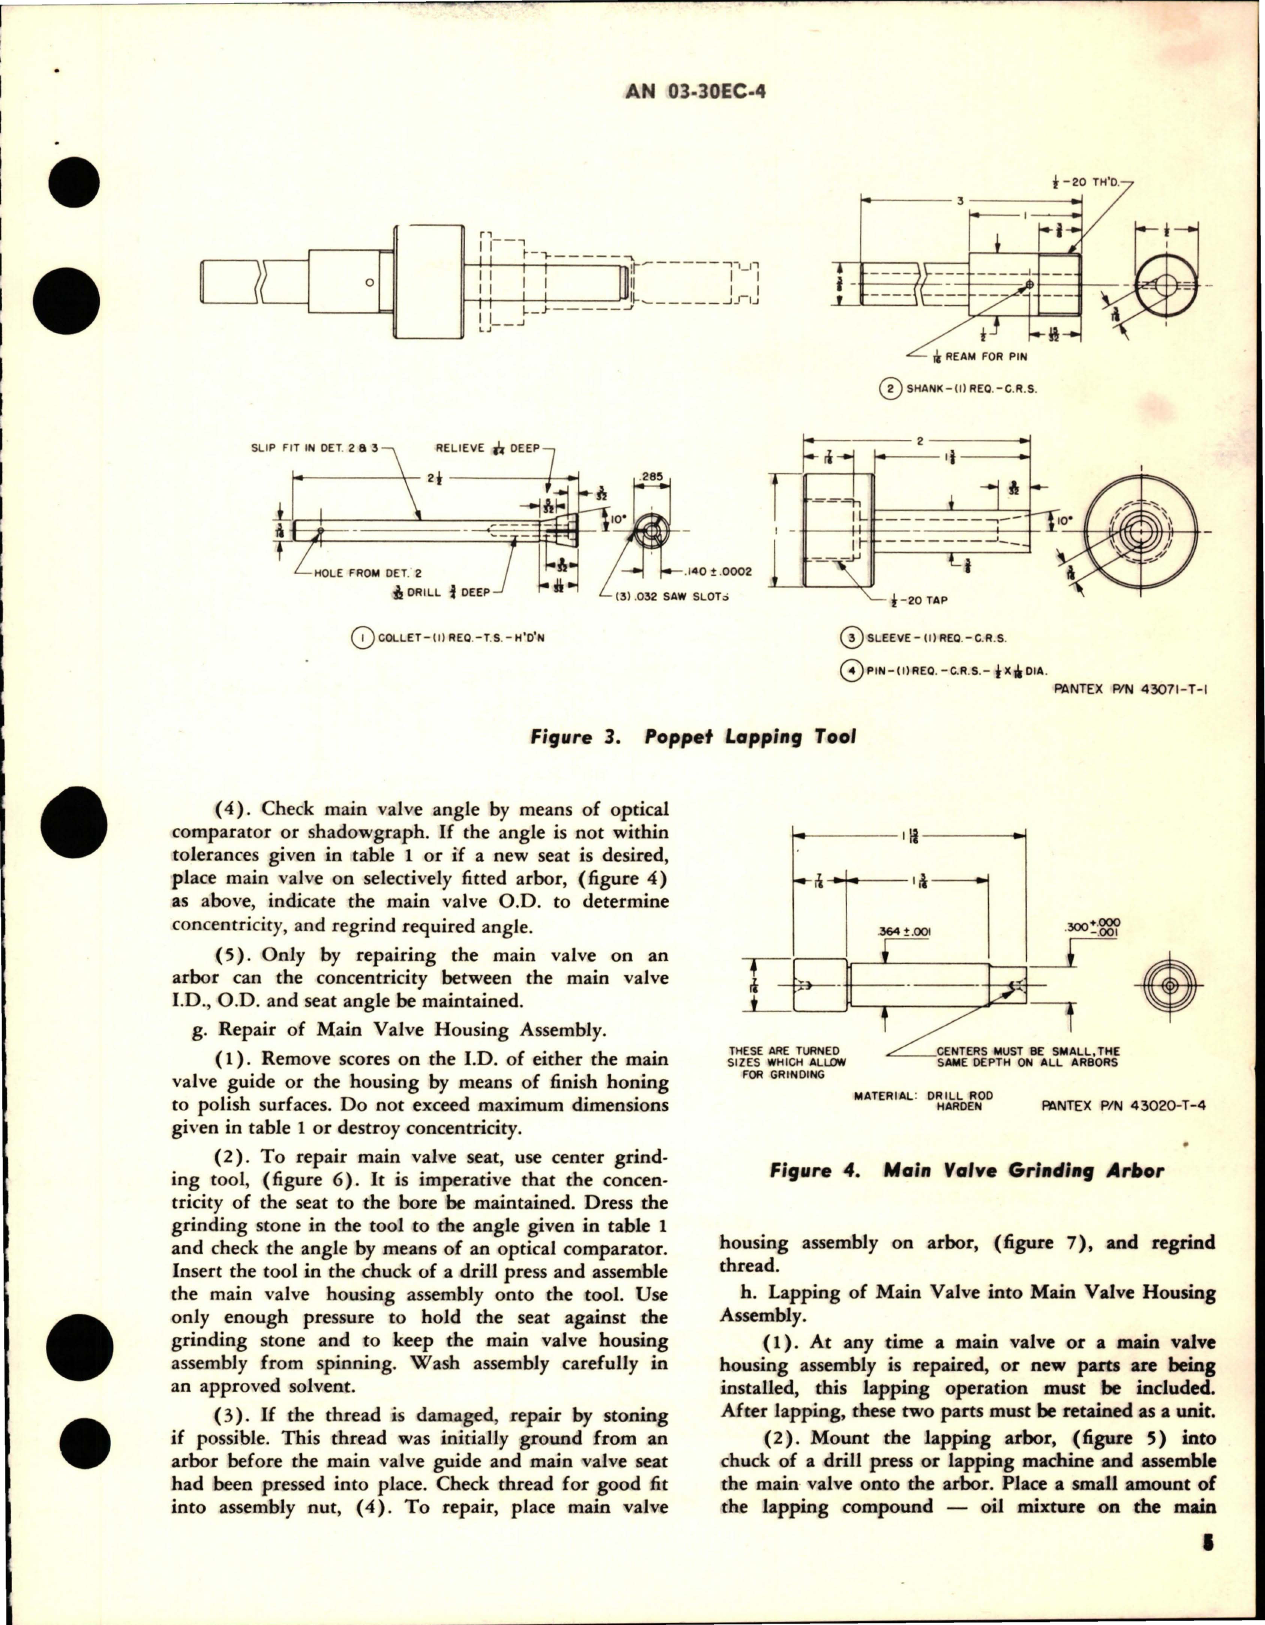 Sample page 5 from AirCorps Library document: Overhaul Instructions with Parts Breakdown for Hydraulic Pressure Relief Valve - HPLV-A1